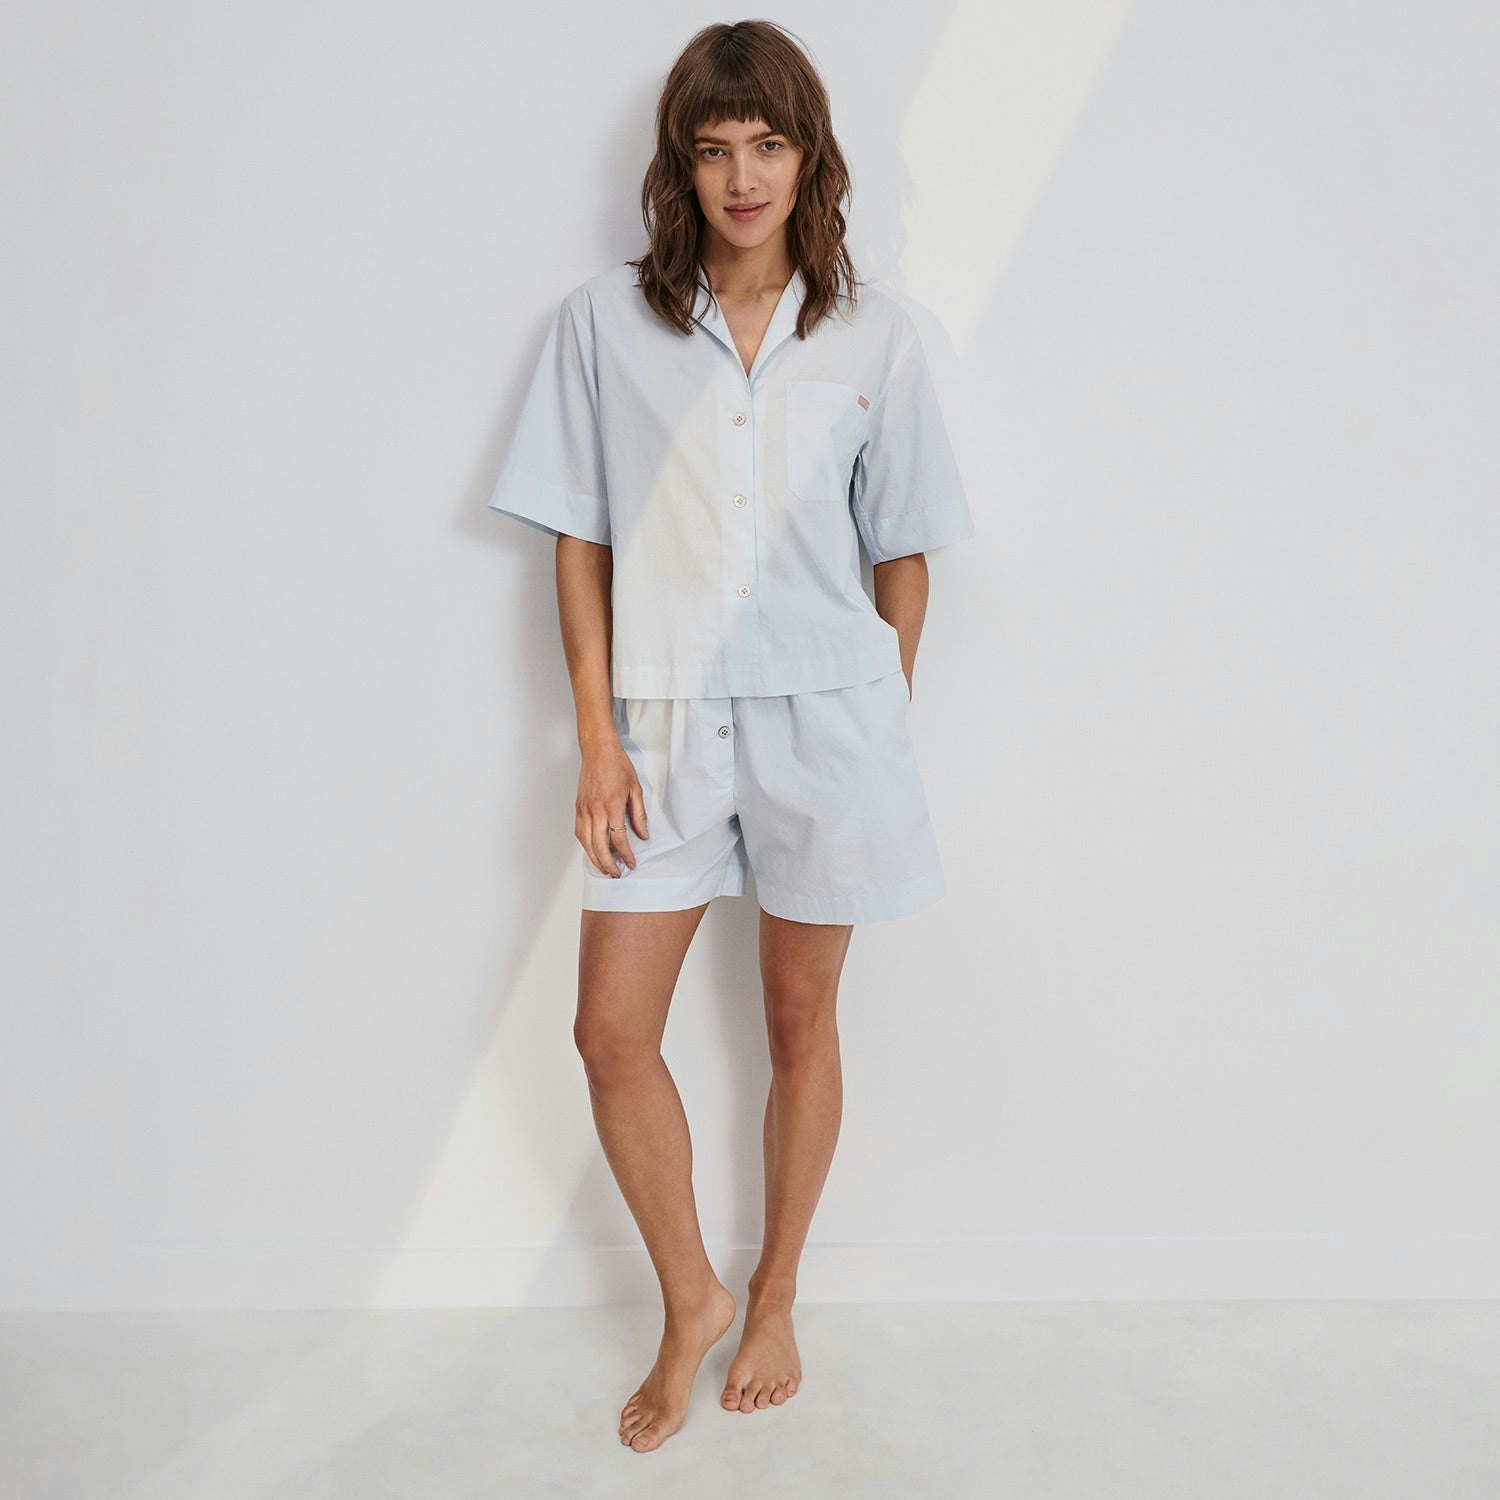 How To Wear Pajamas Out: Boxers As Shorts, PJ Tops As Shirts, & More Outfit  Ideas